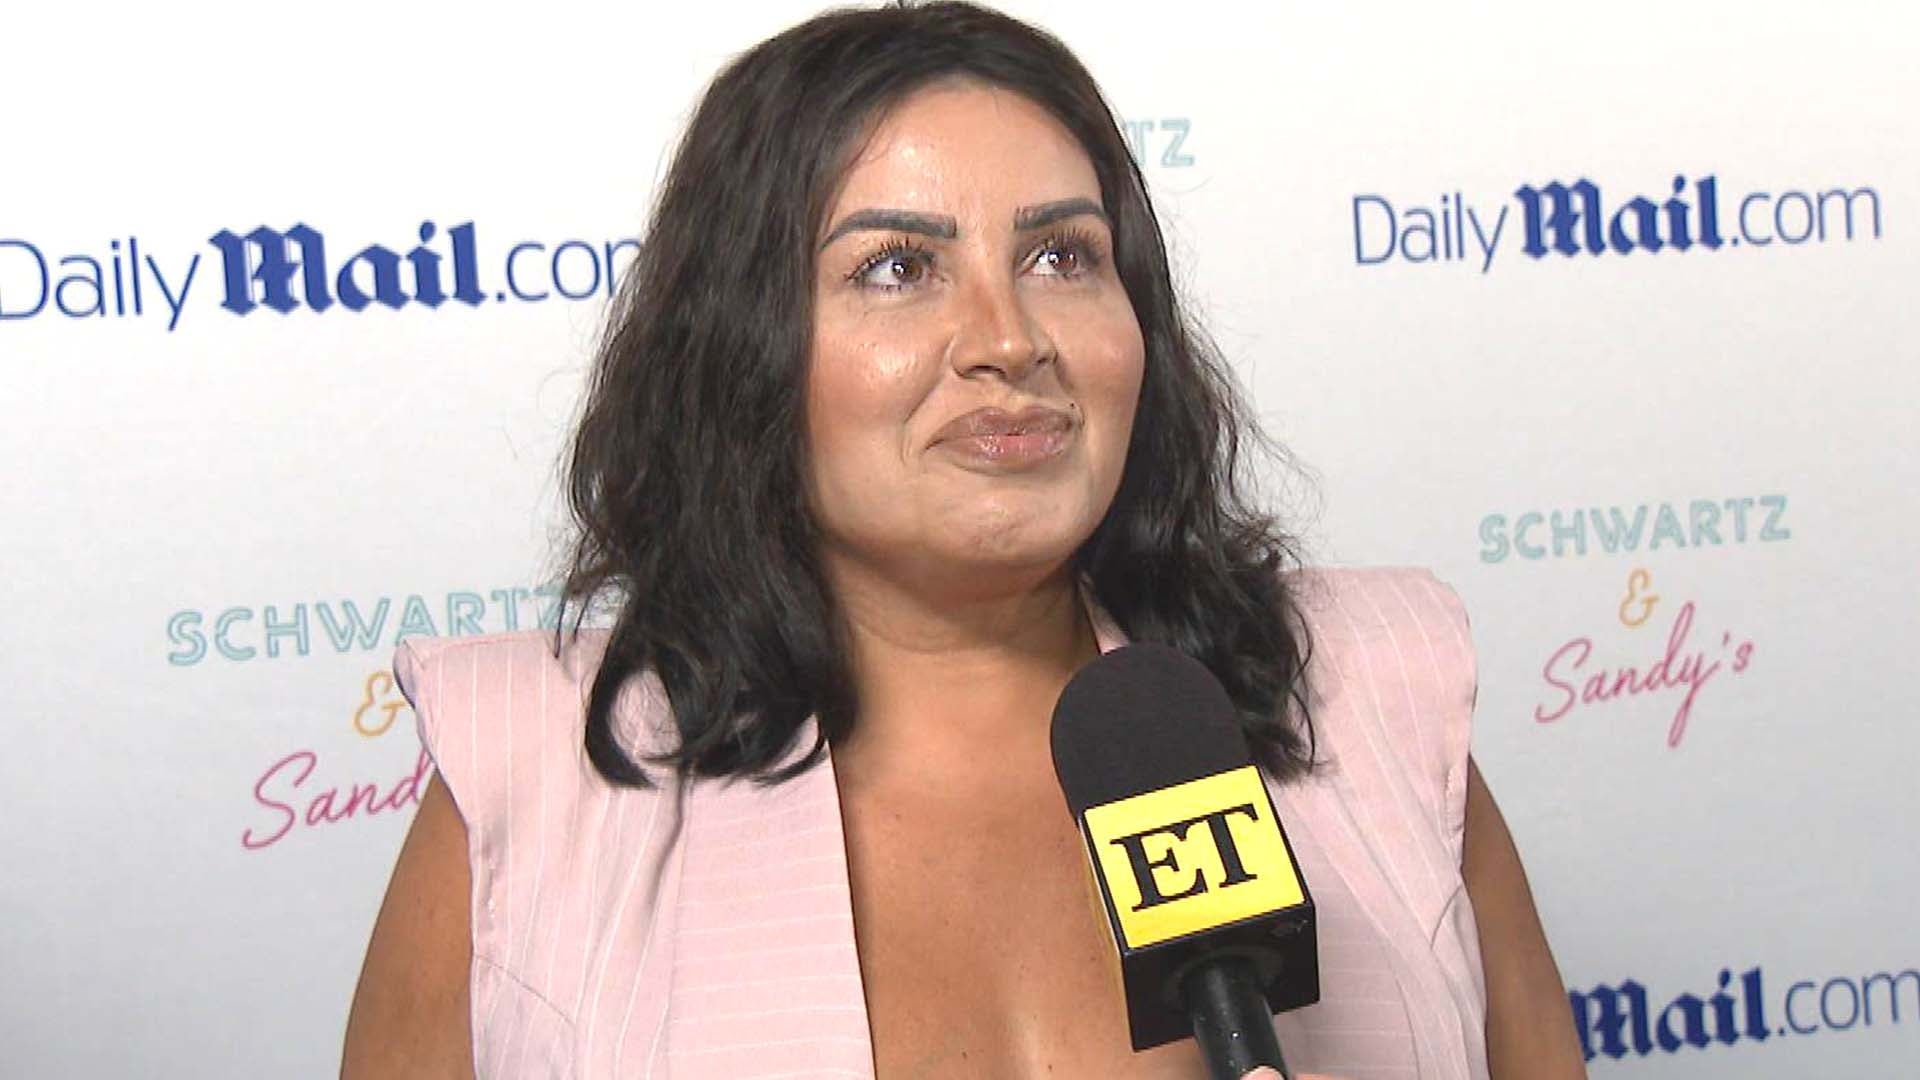 Mercedes 'MJ' Javid Teases Next Chapter of 'Shahs of Sunset' After Cancelation (Exclusive)